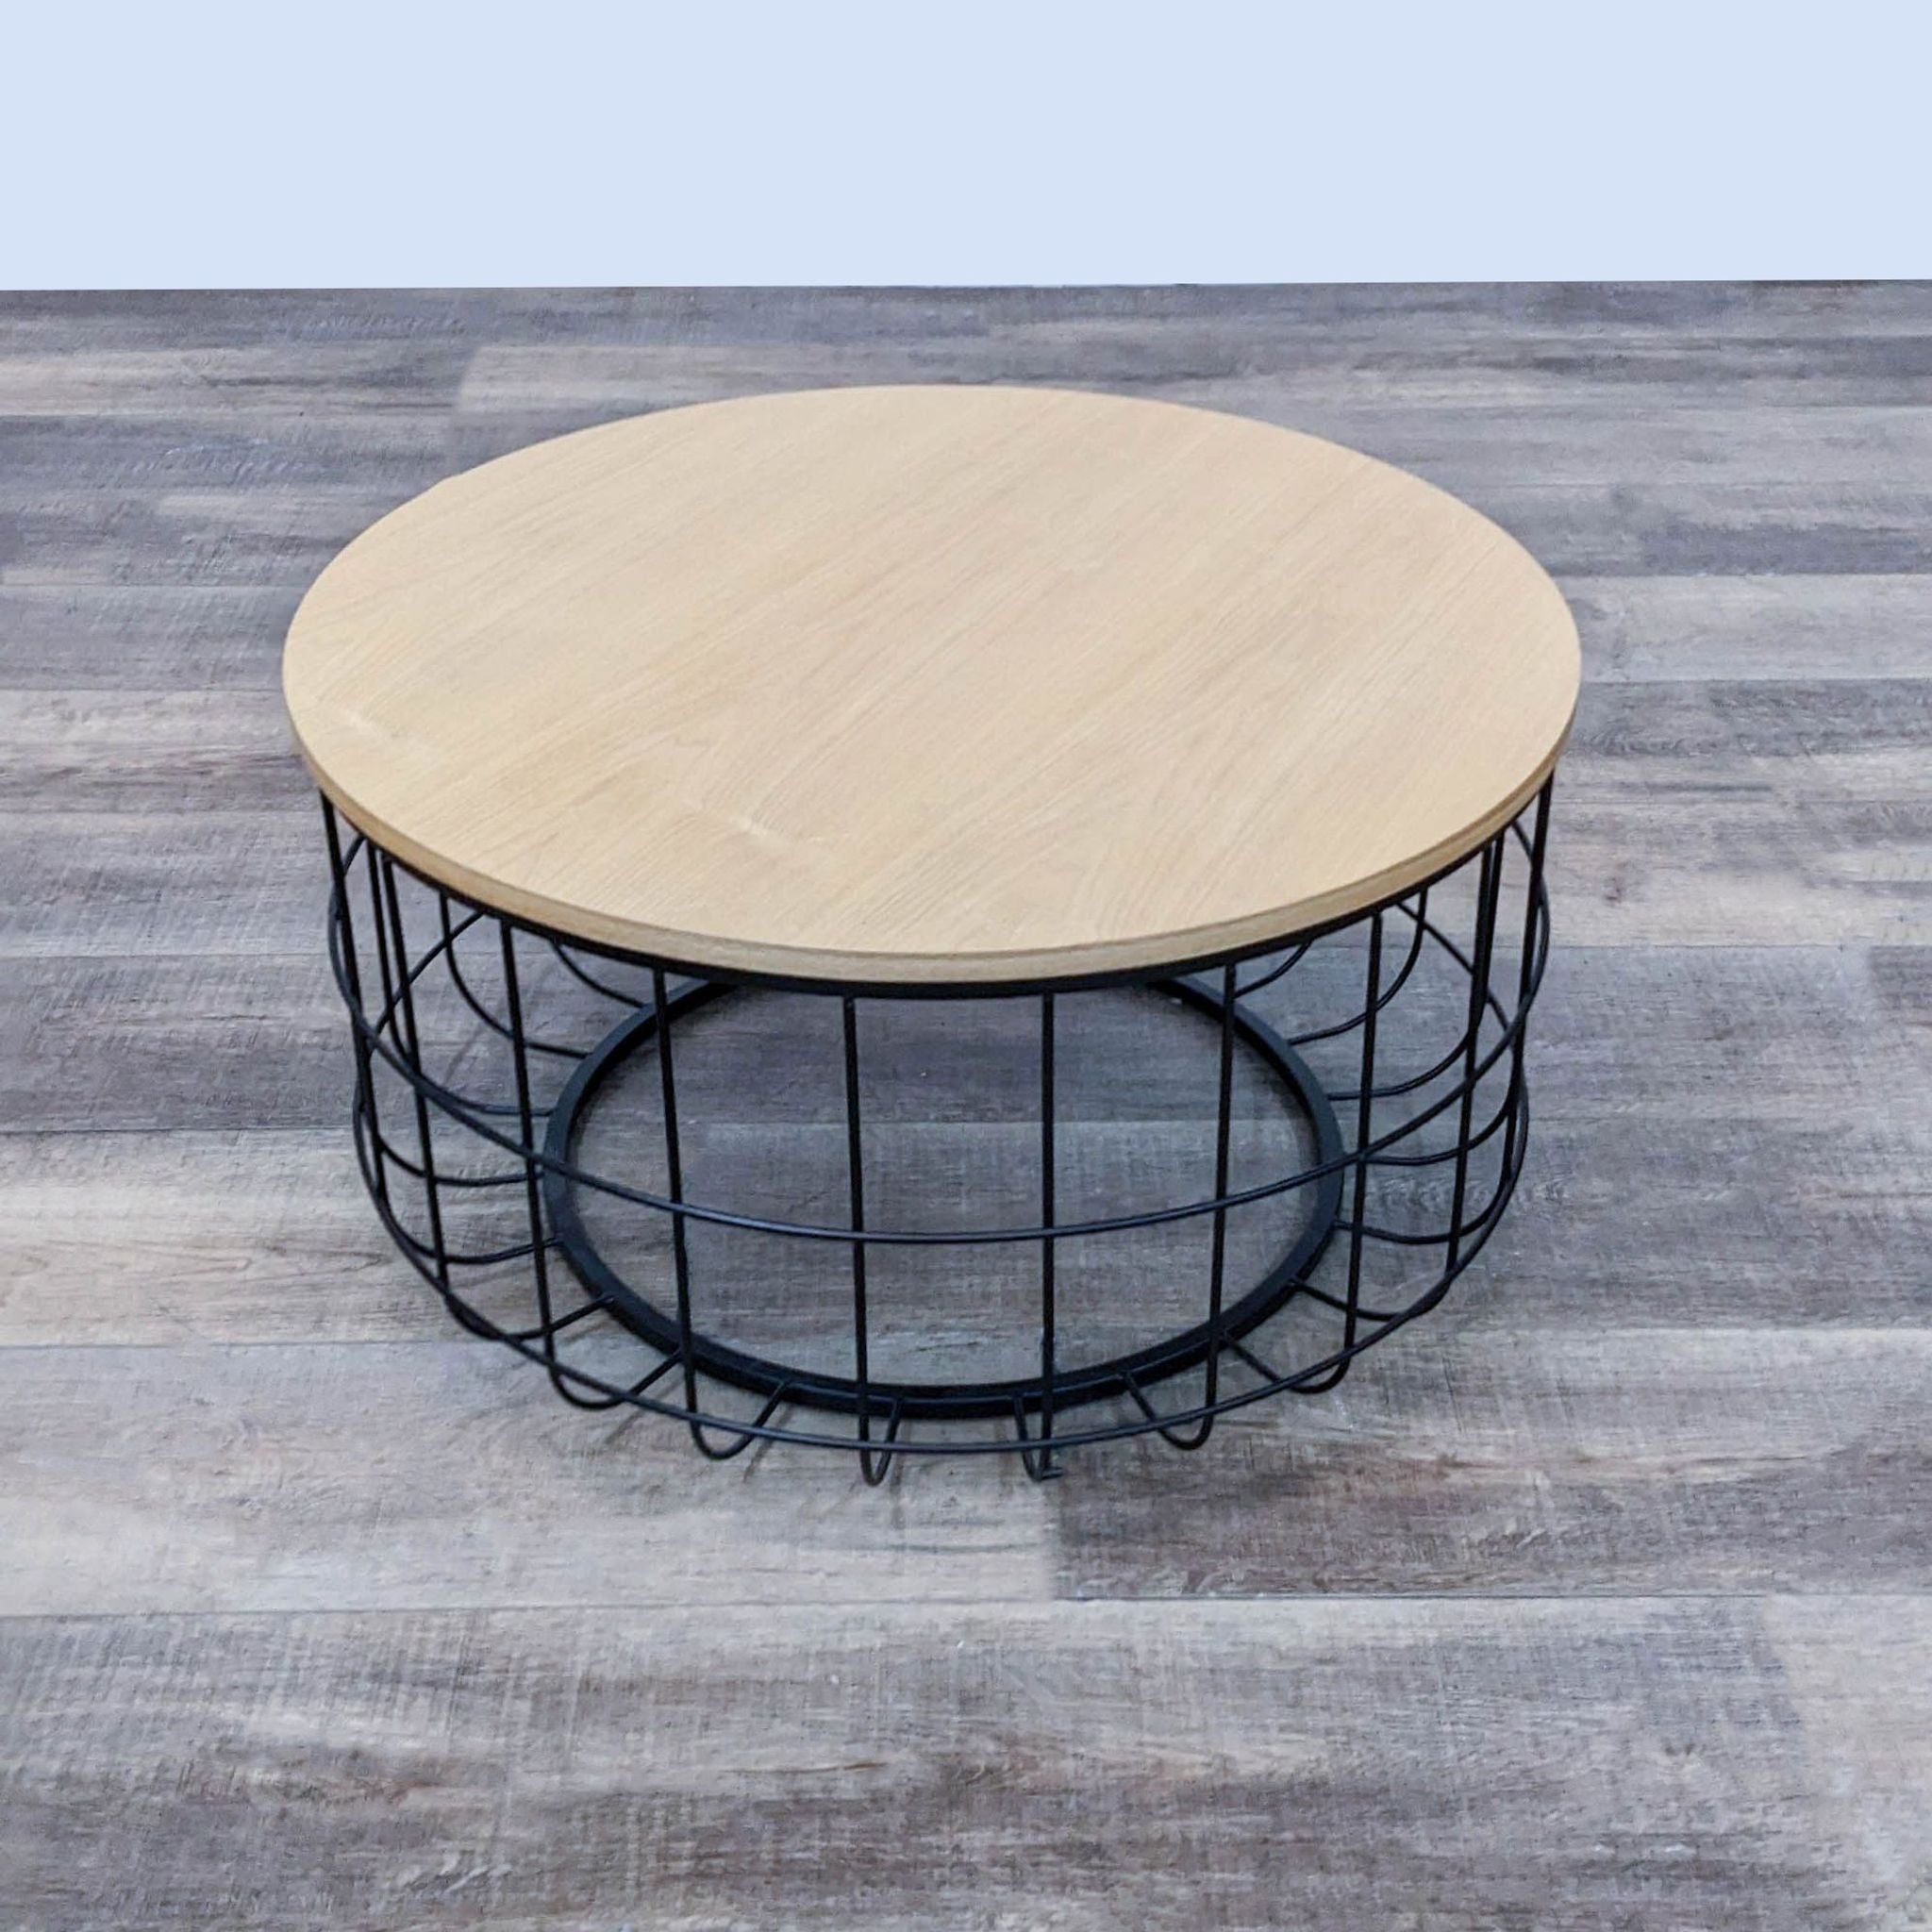 Wooden circular coffee table with a metal grid base by Oliver Space, showcased on a gray floor.